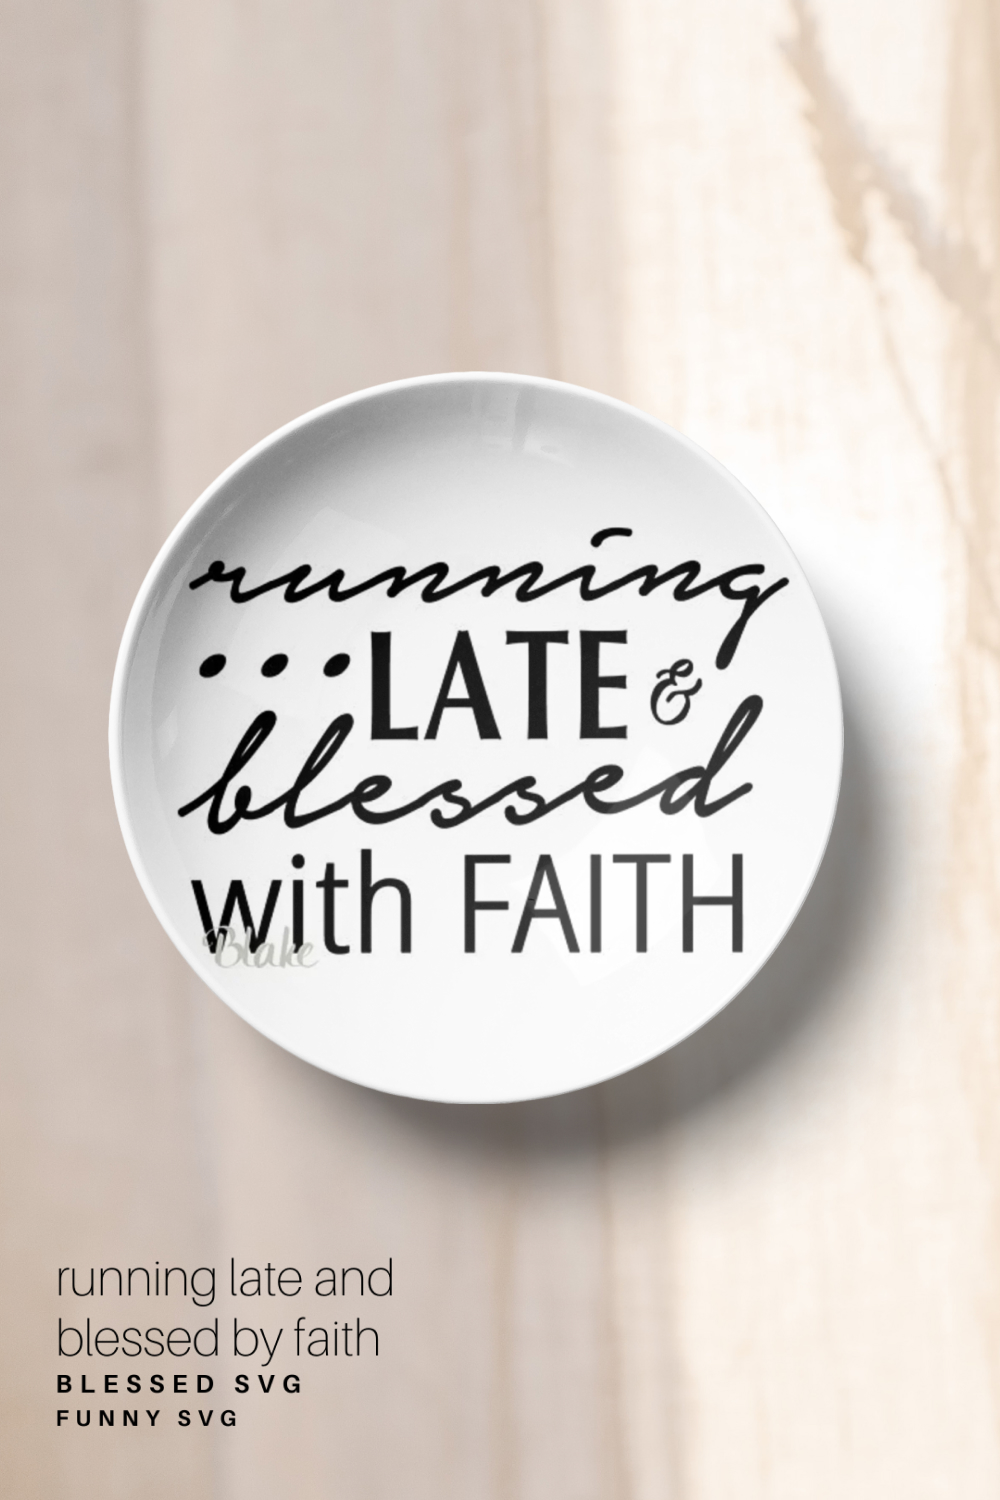 Running late and blessed by faith on plate.